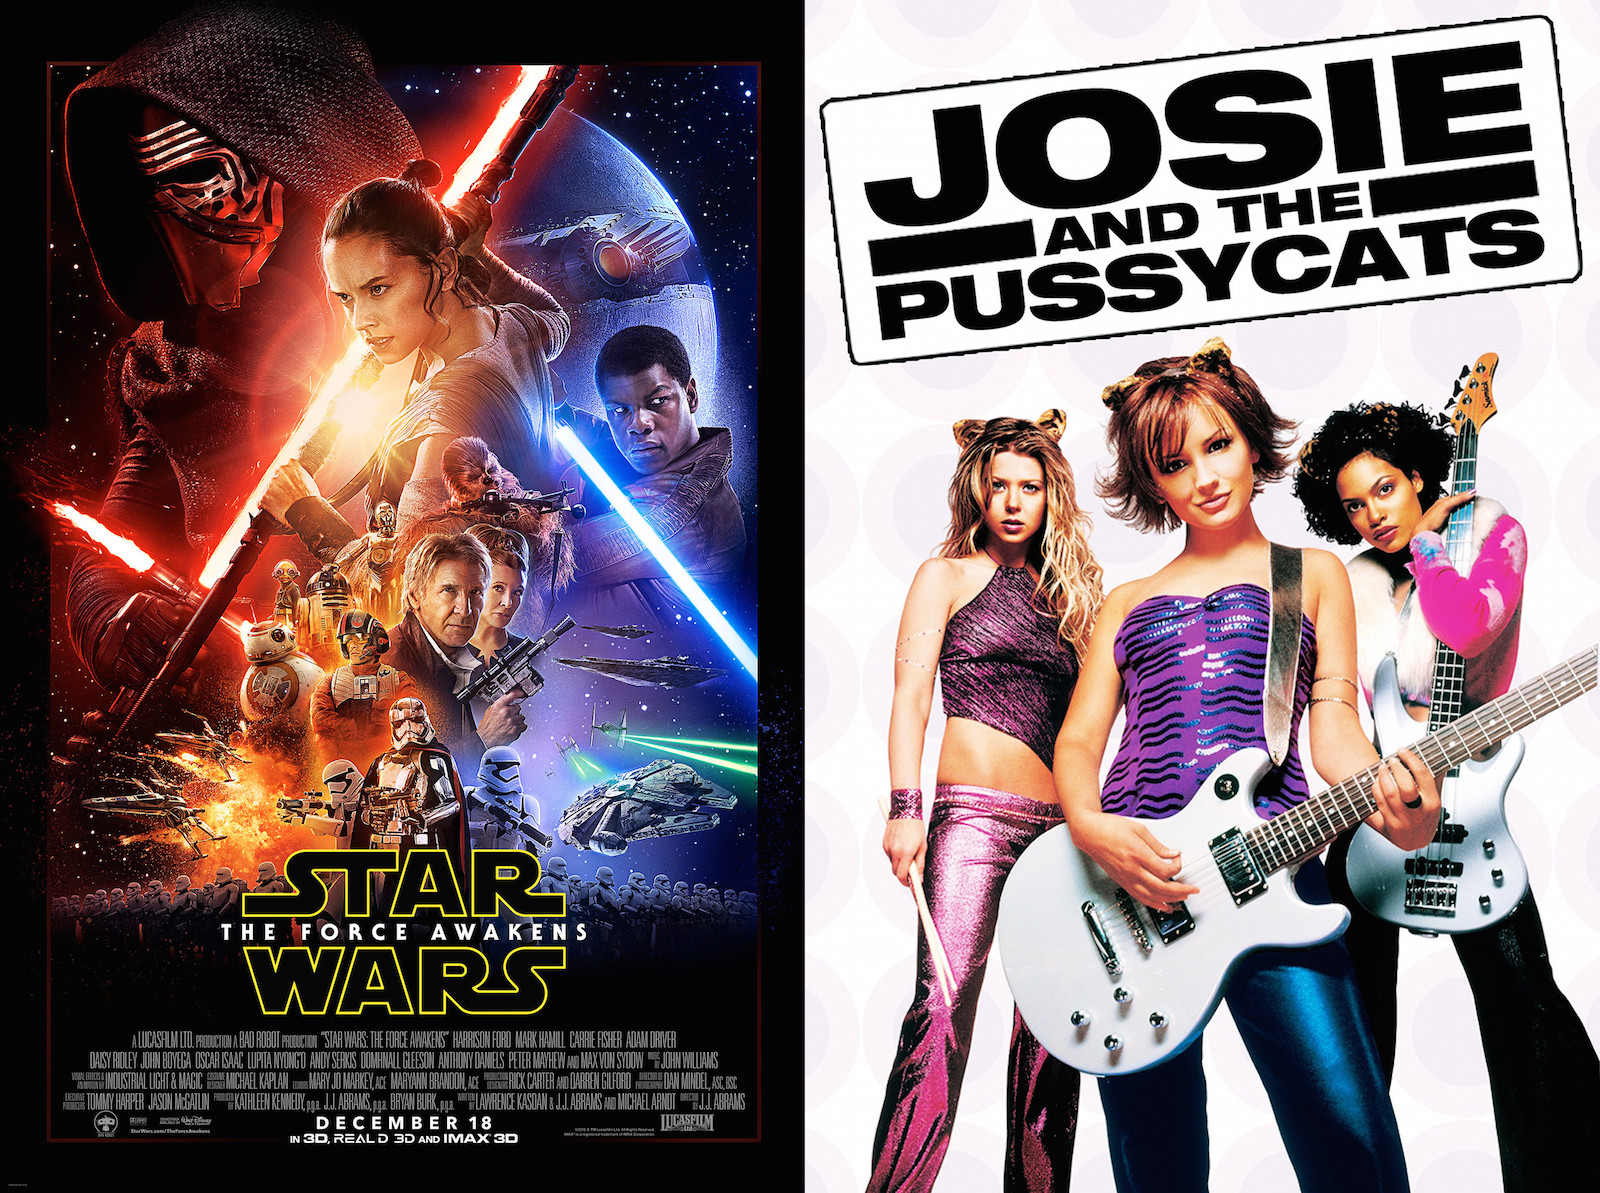 EPISODE 1: Josie and the Pussycats/Star Wars: The Force Awakens